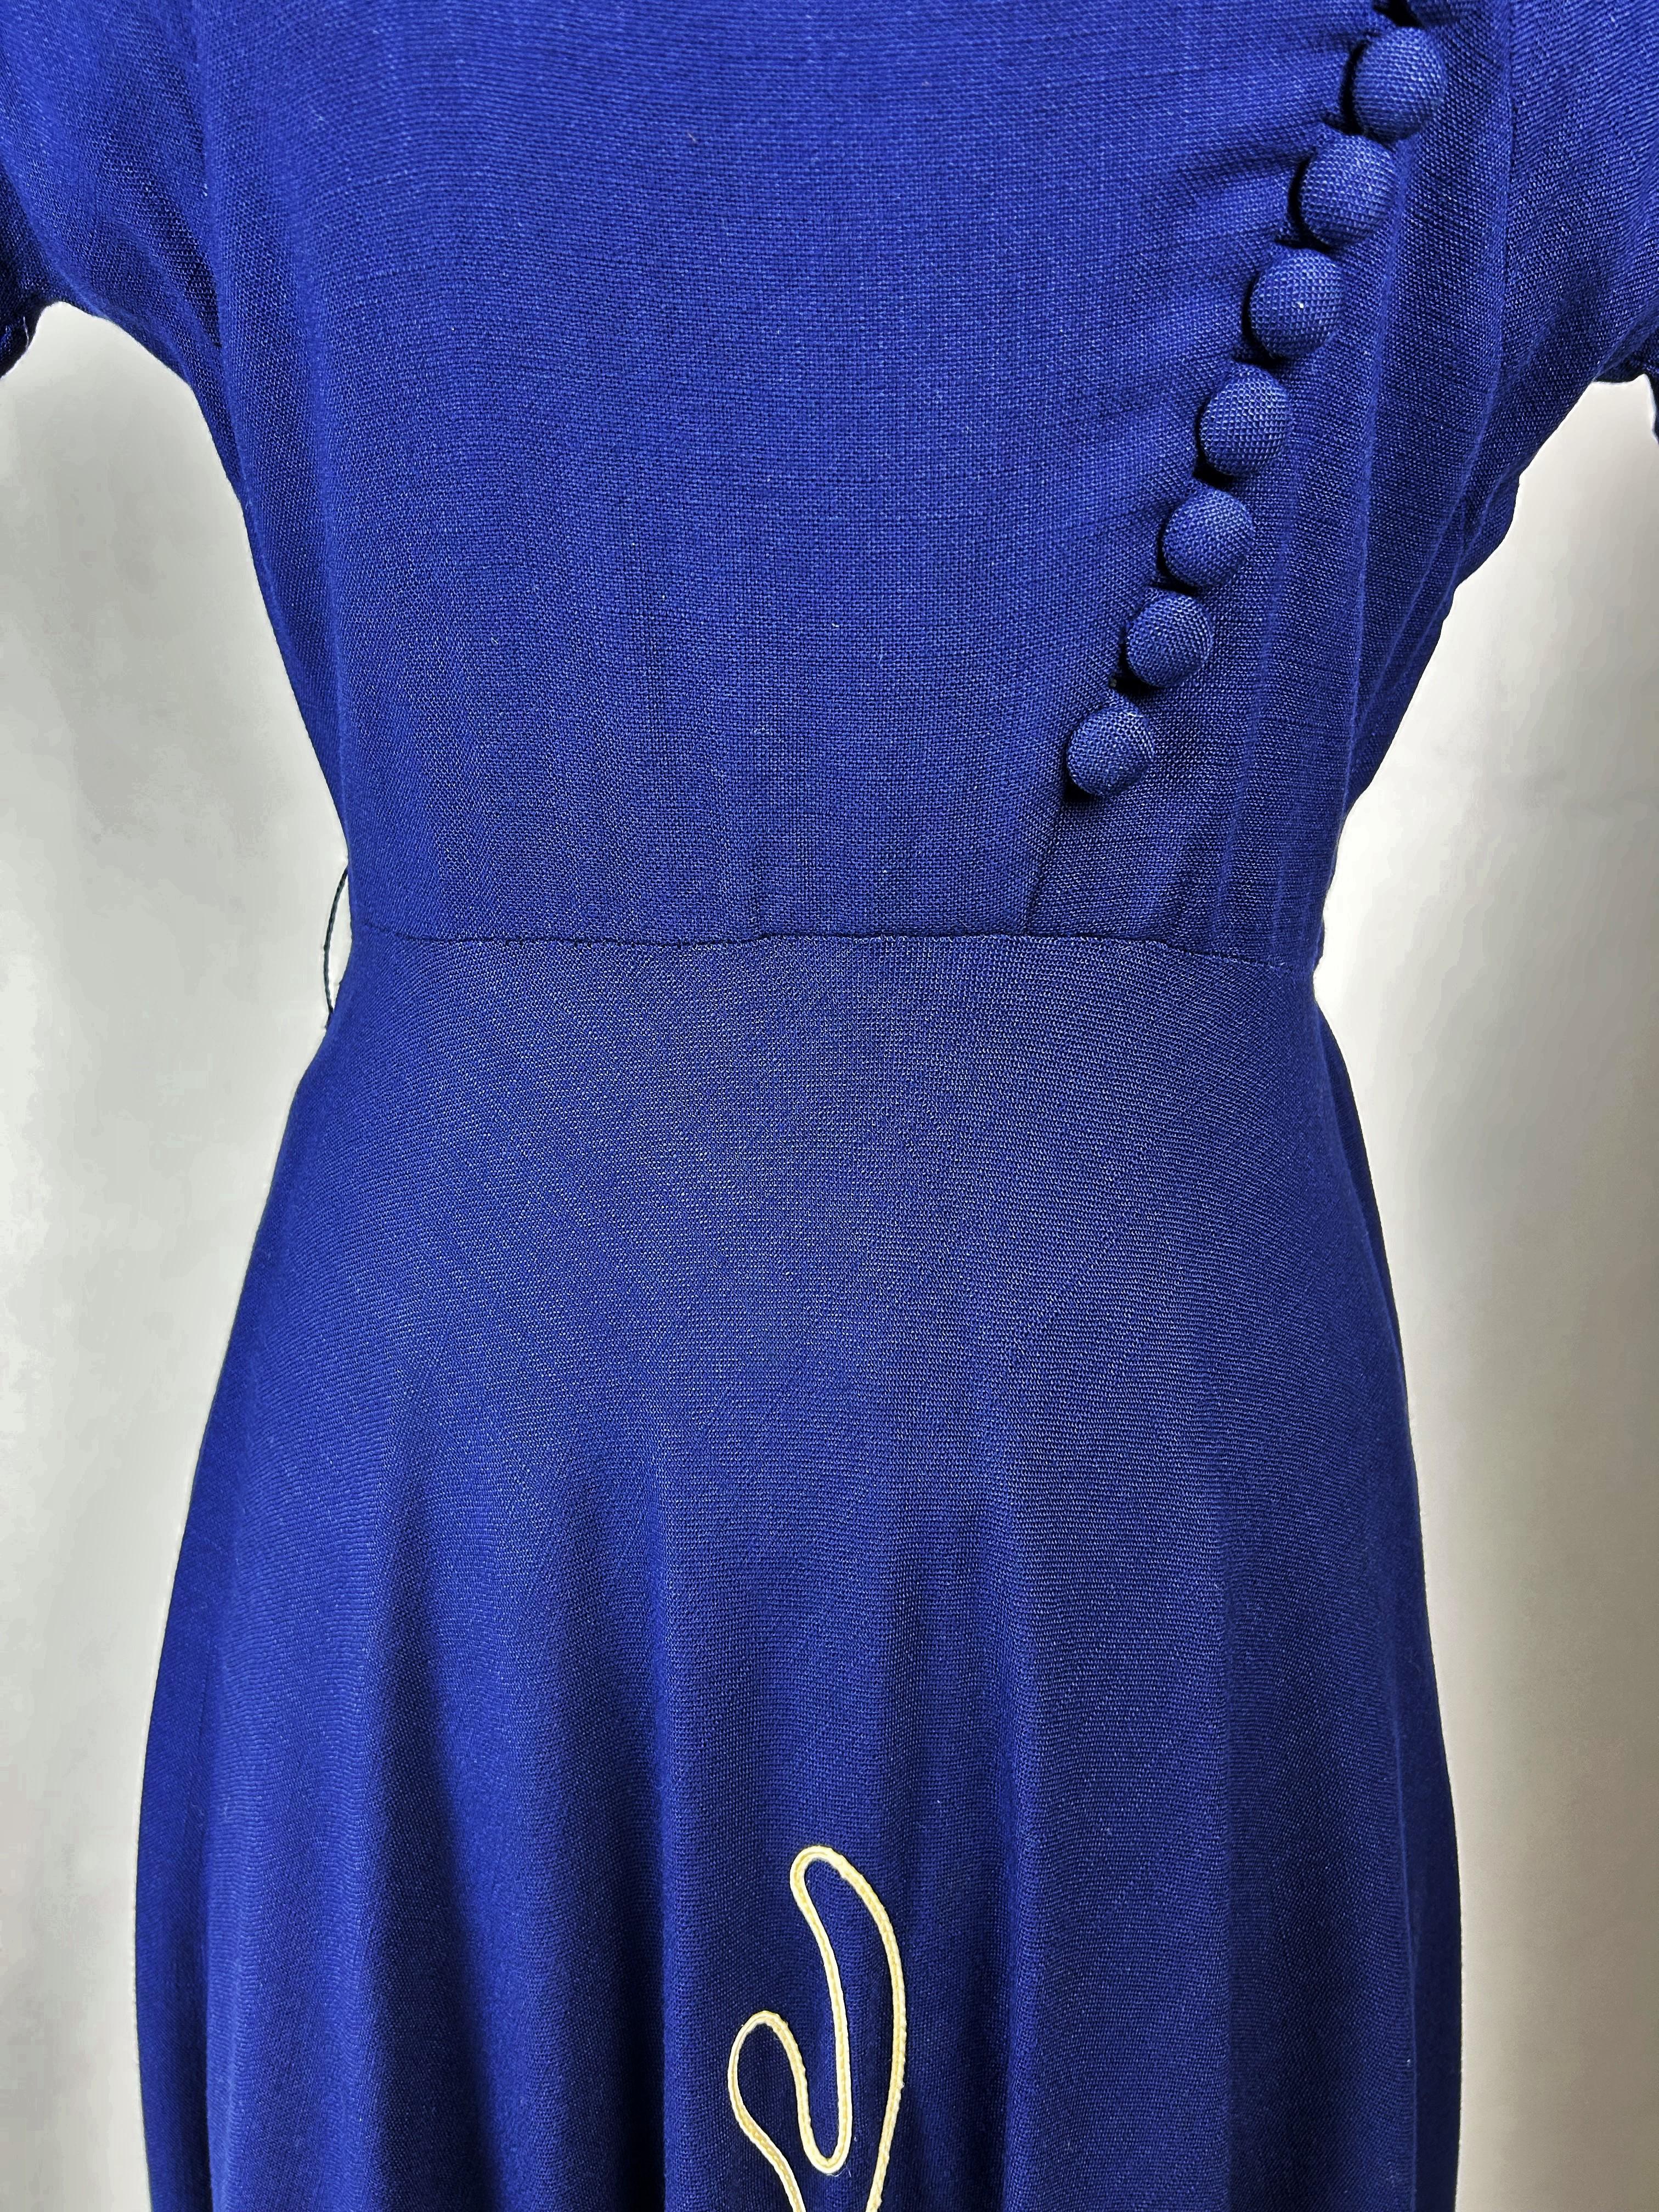 A Navy French Day Dress with white piping appliqué Circa 1945-1950 For Sale 7